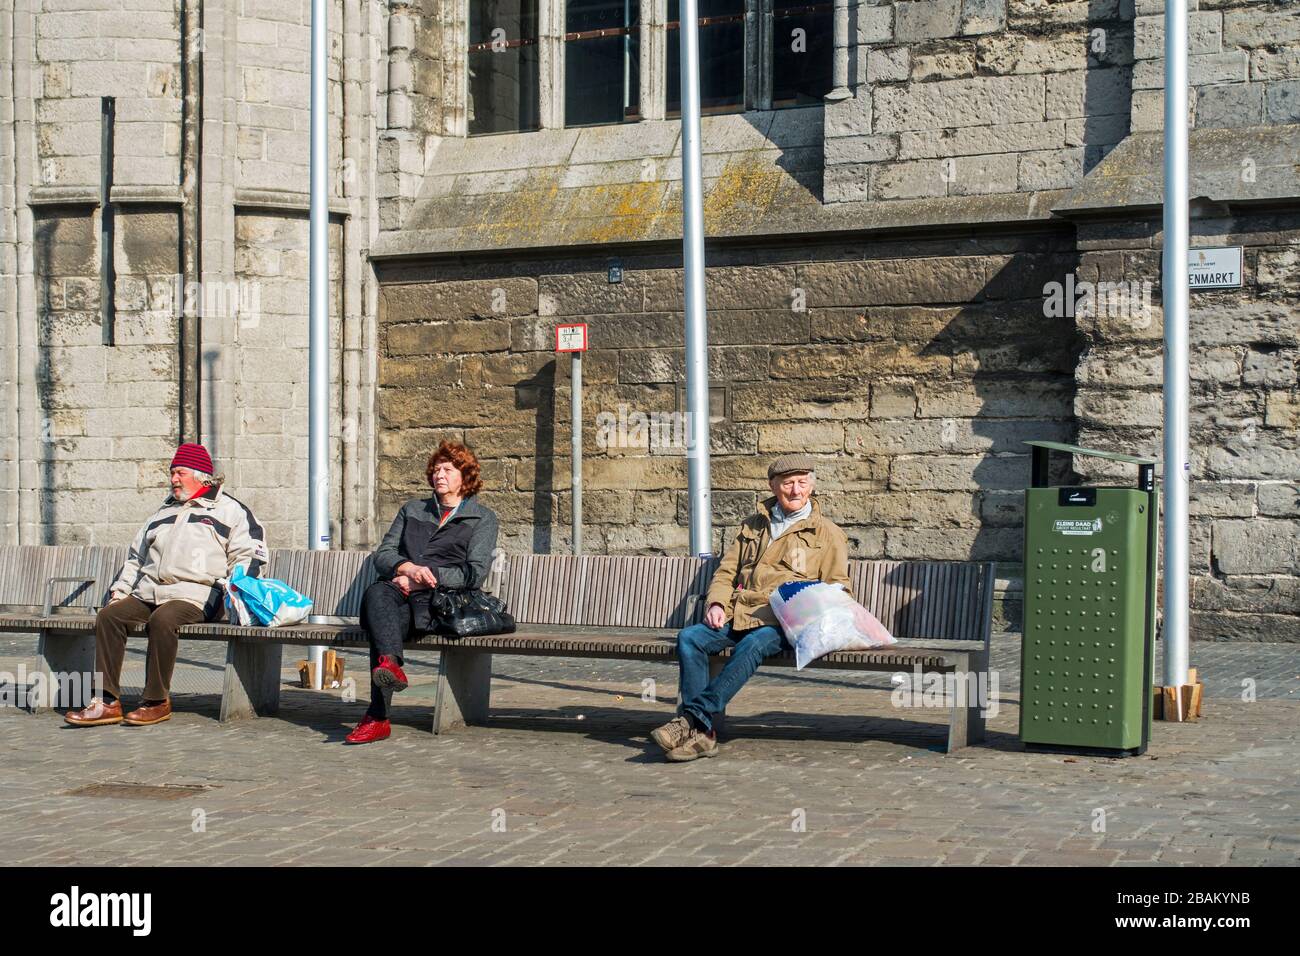 Social distancing due to the 2020 COVID-19 / coronavirus / corona virus pandemic in the Flemish city centre of Ghent, East Flanders, Belgium Stock Photo